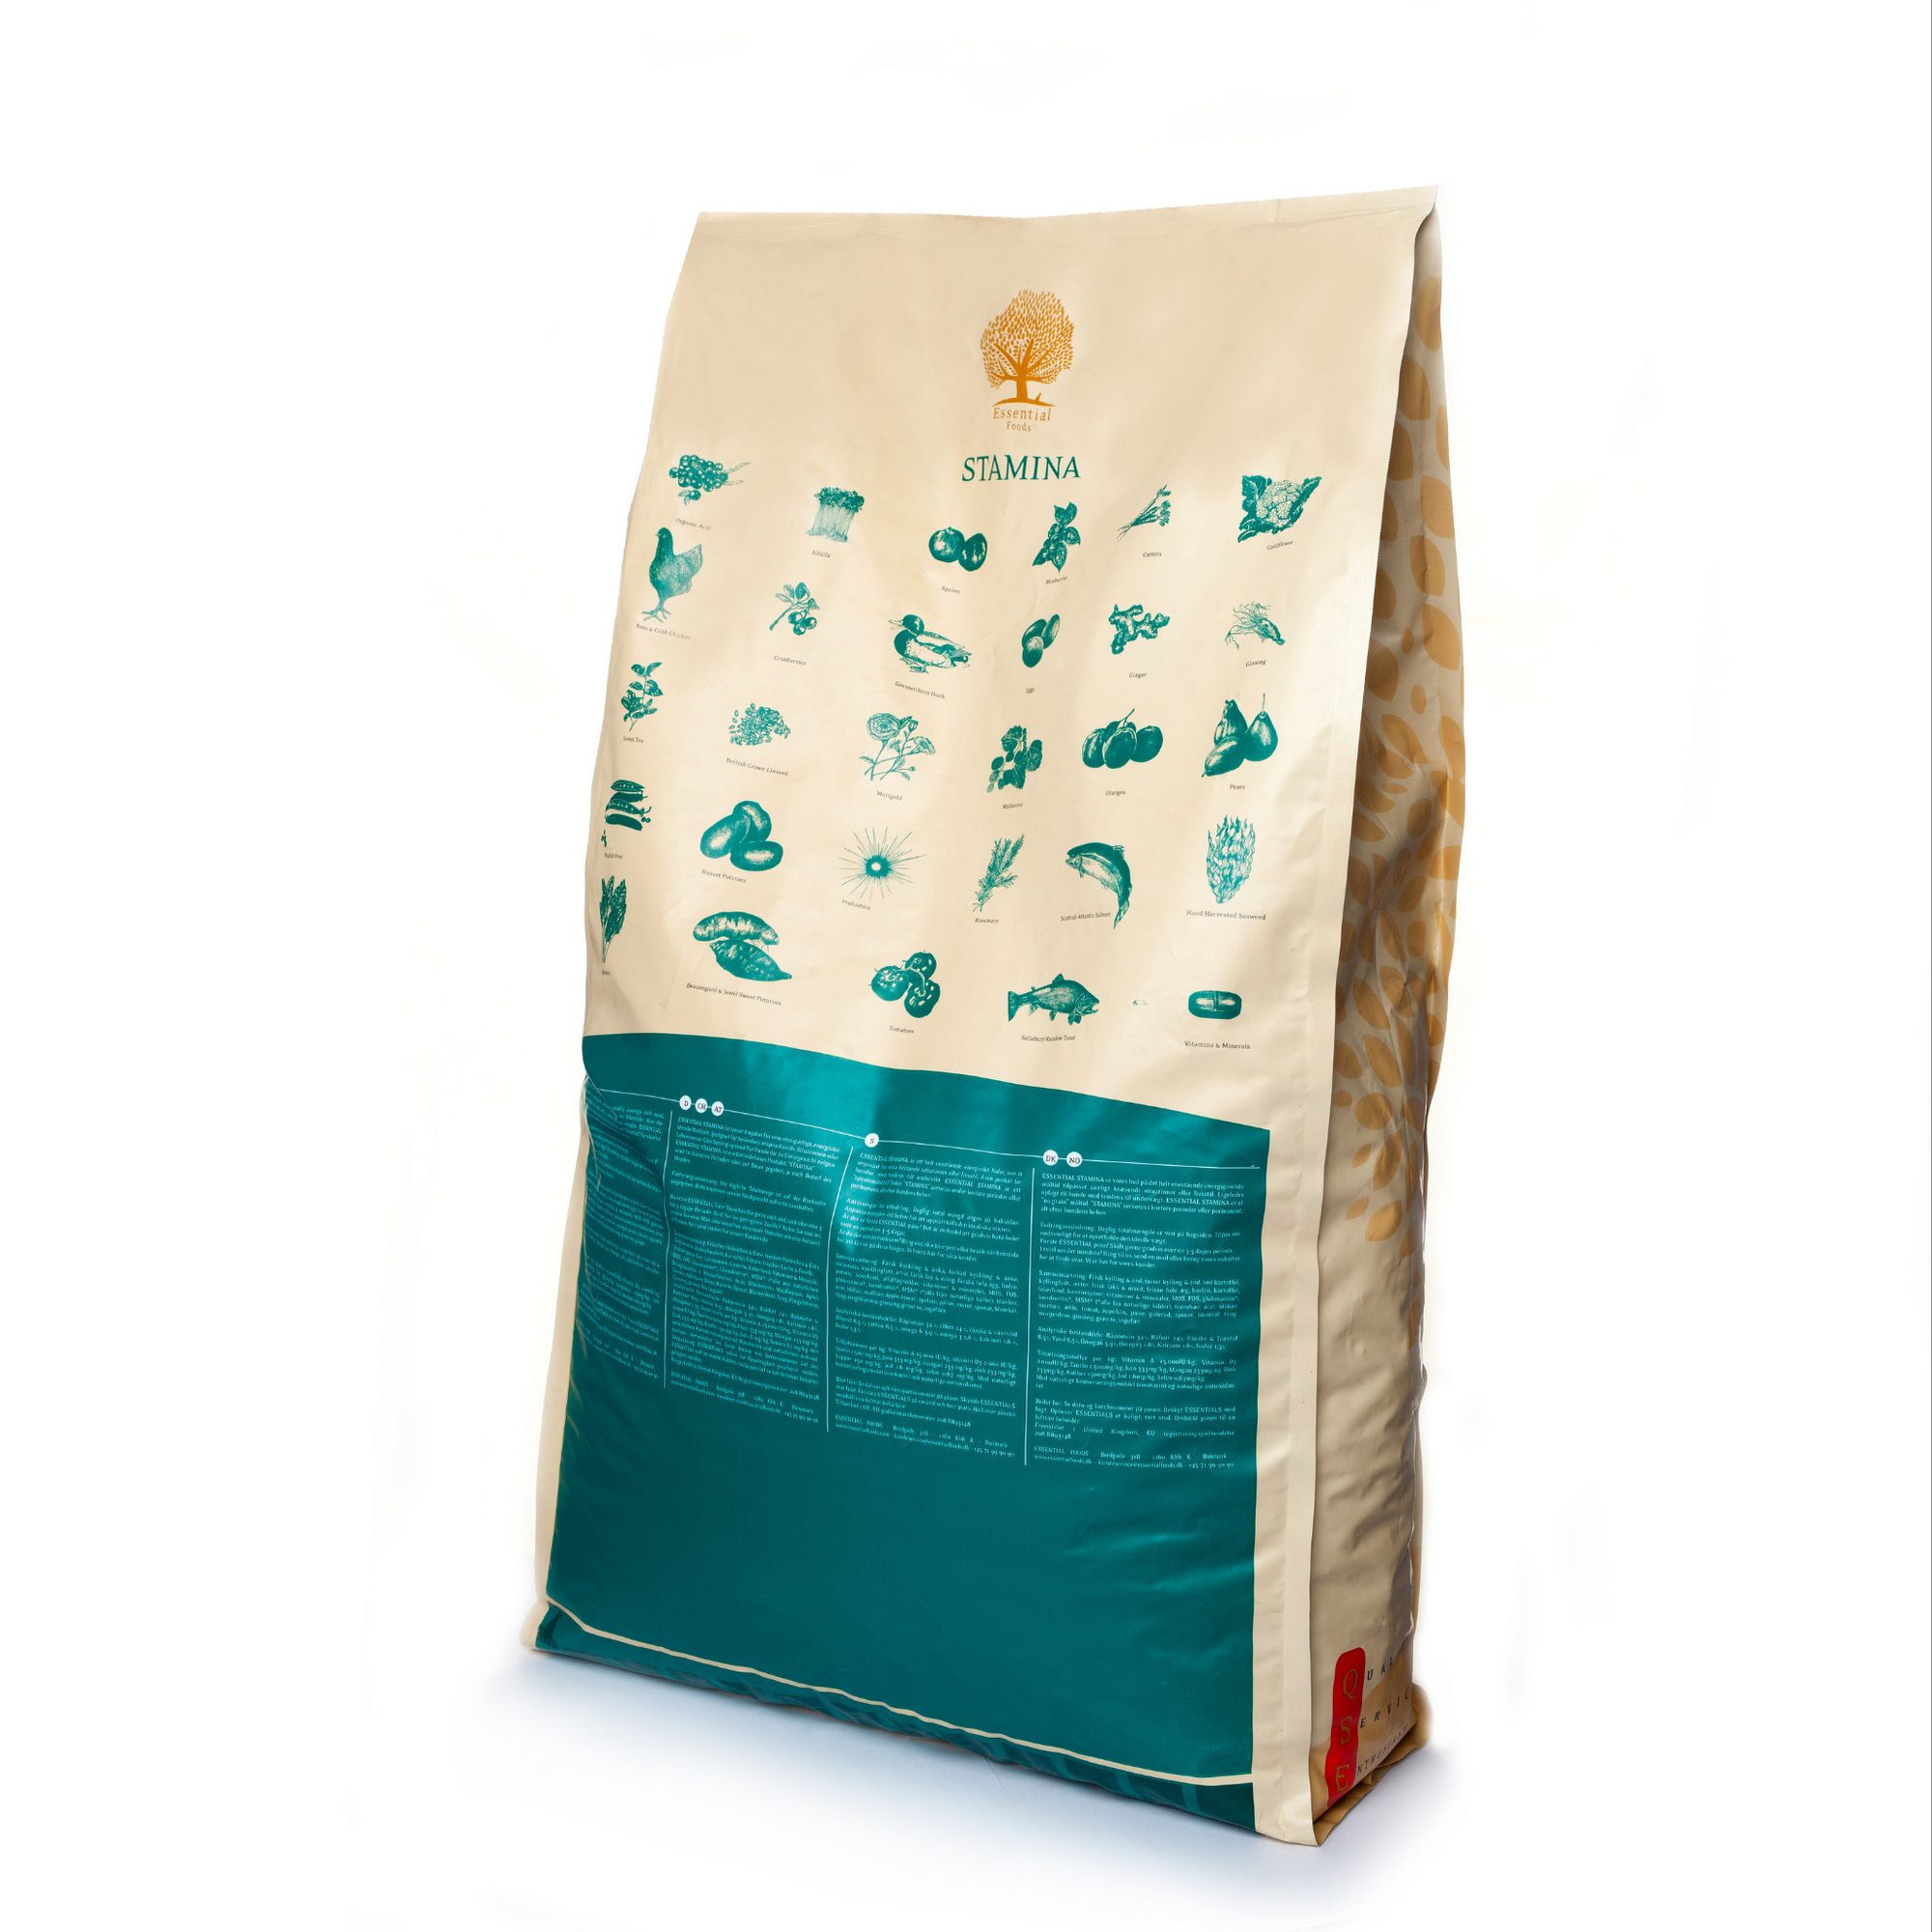 88% meat duck, chick, salmon, trout, eggs Super premium grainless feed for adult dogs weighing over 15kg STAMINA